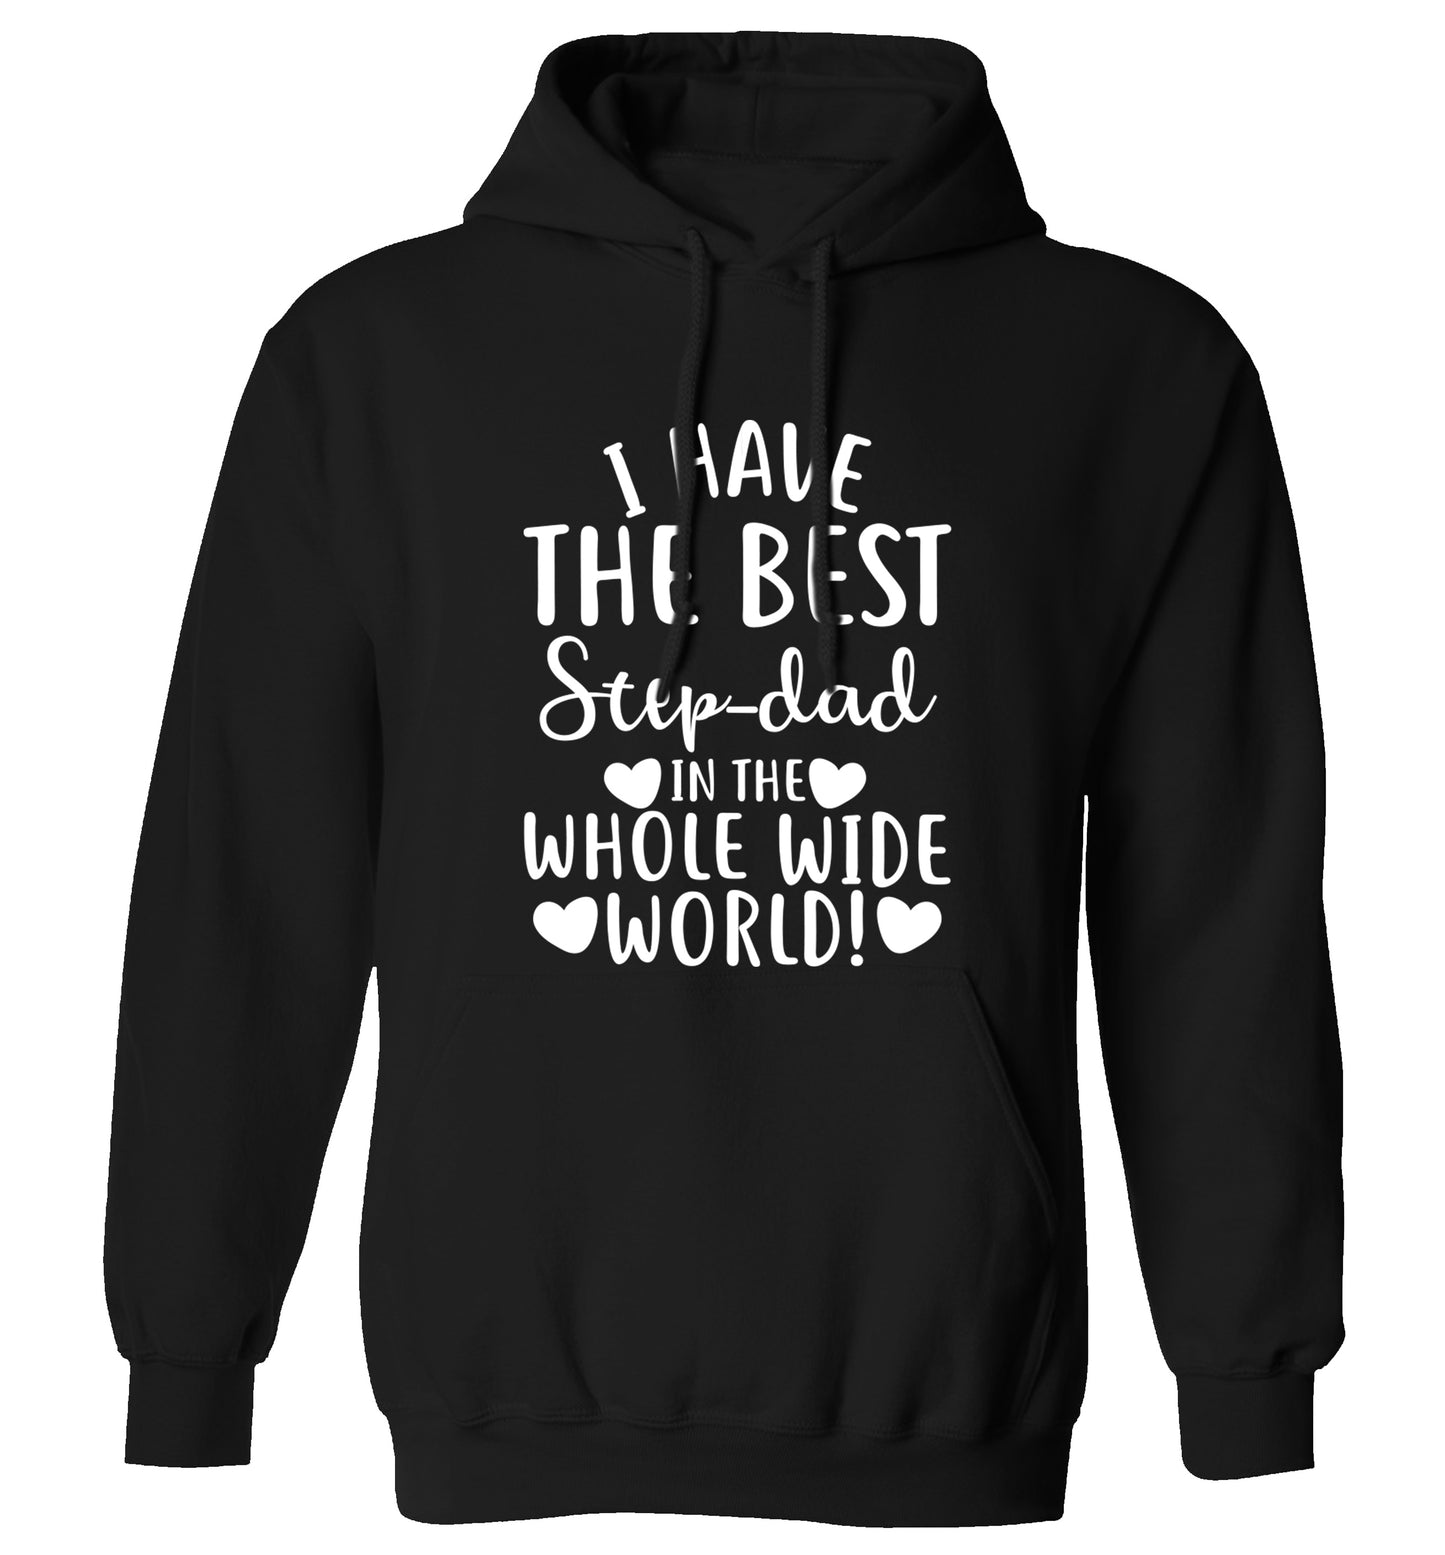 I have the best step-dad in the whole wide world! adults unisex black hoodie 2XL